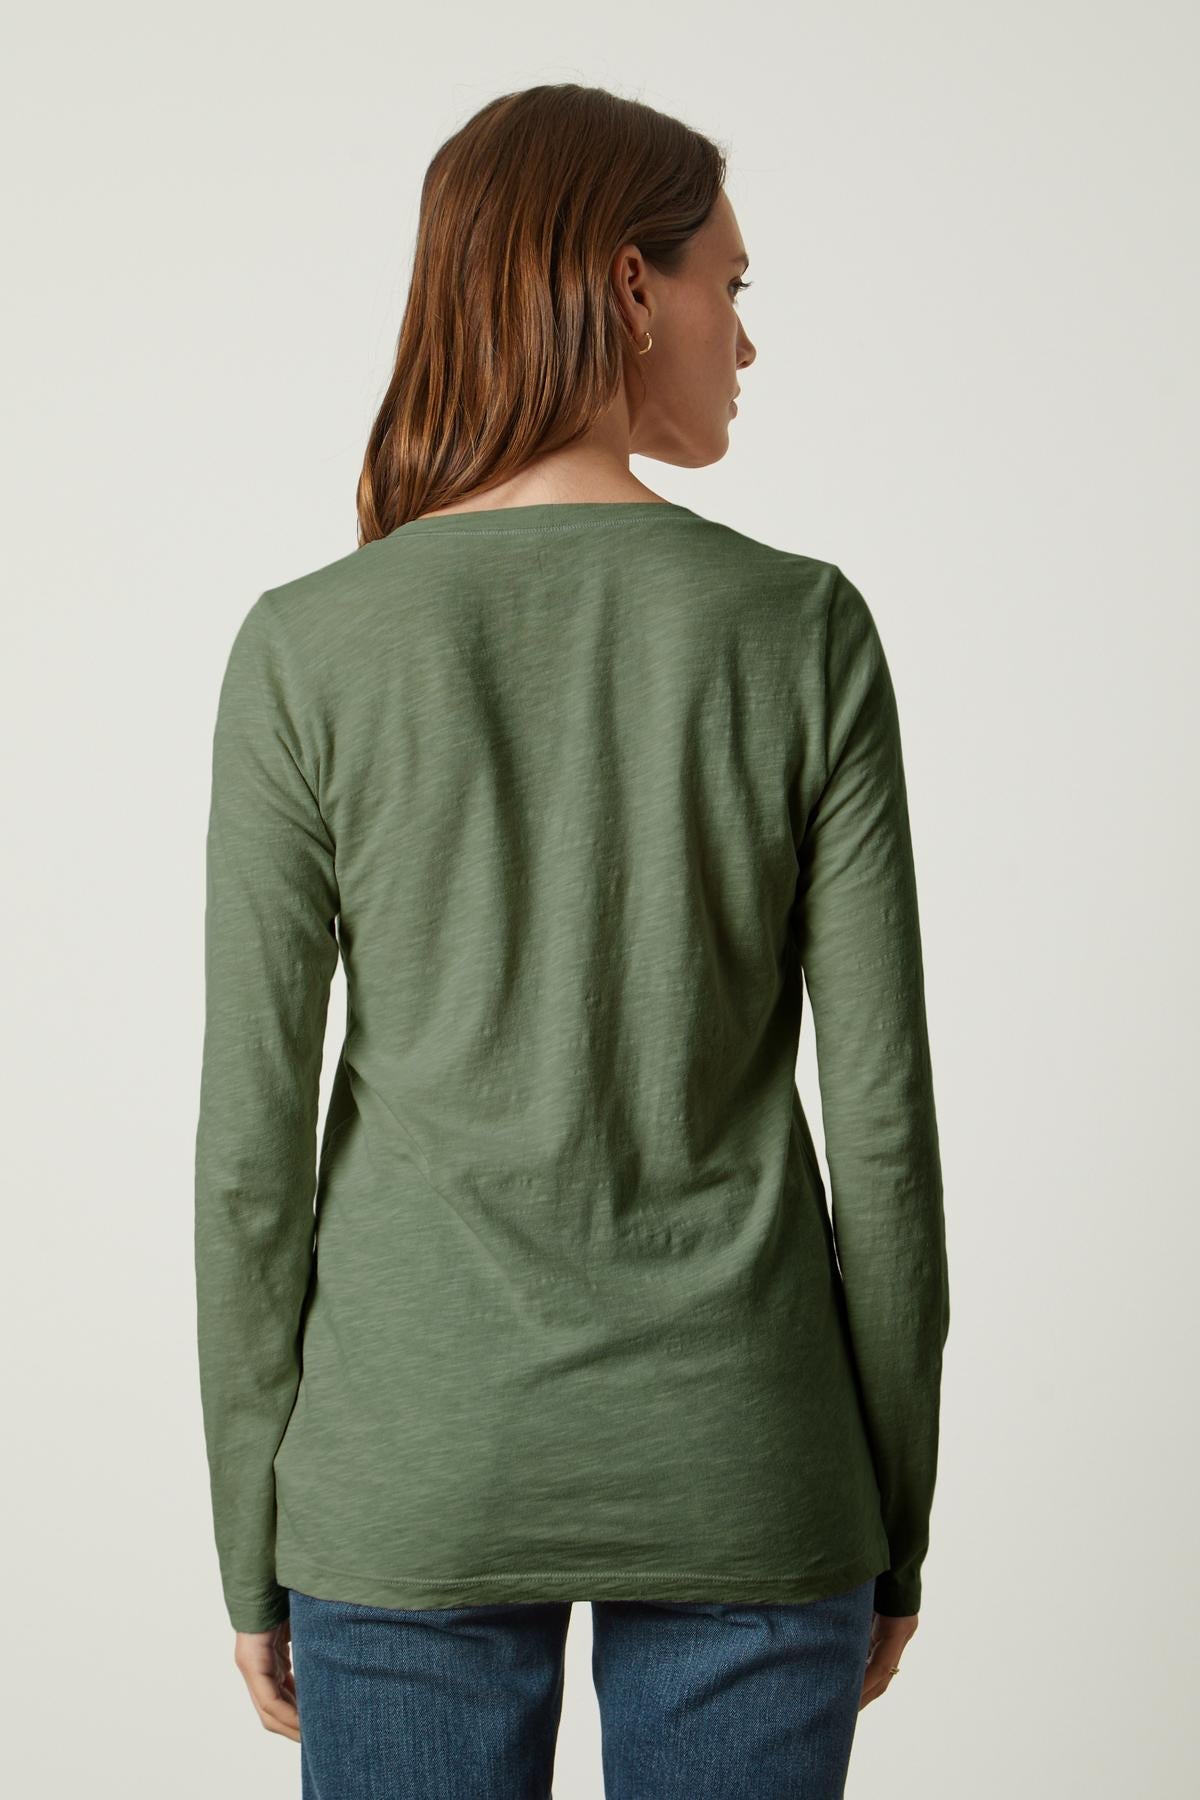   The back view of a person wearing jeans and a Velvet by Graham & Spencer BLAIRE ORIGINAL SLUB TEE. 